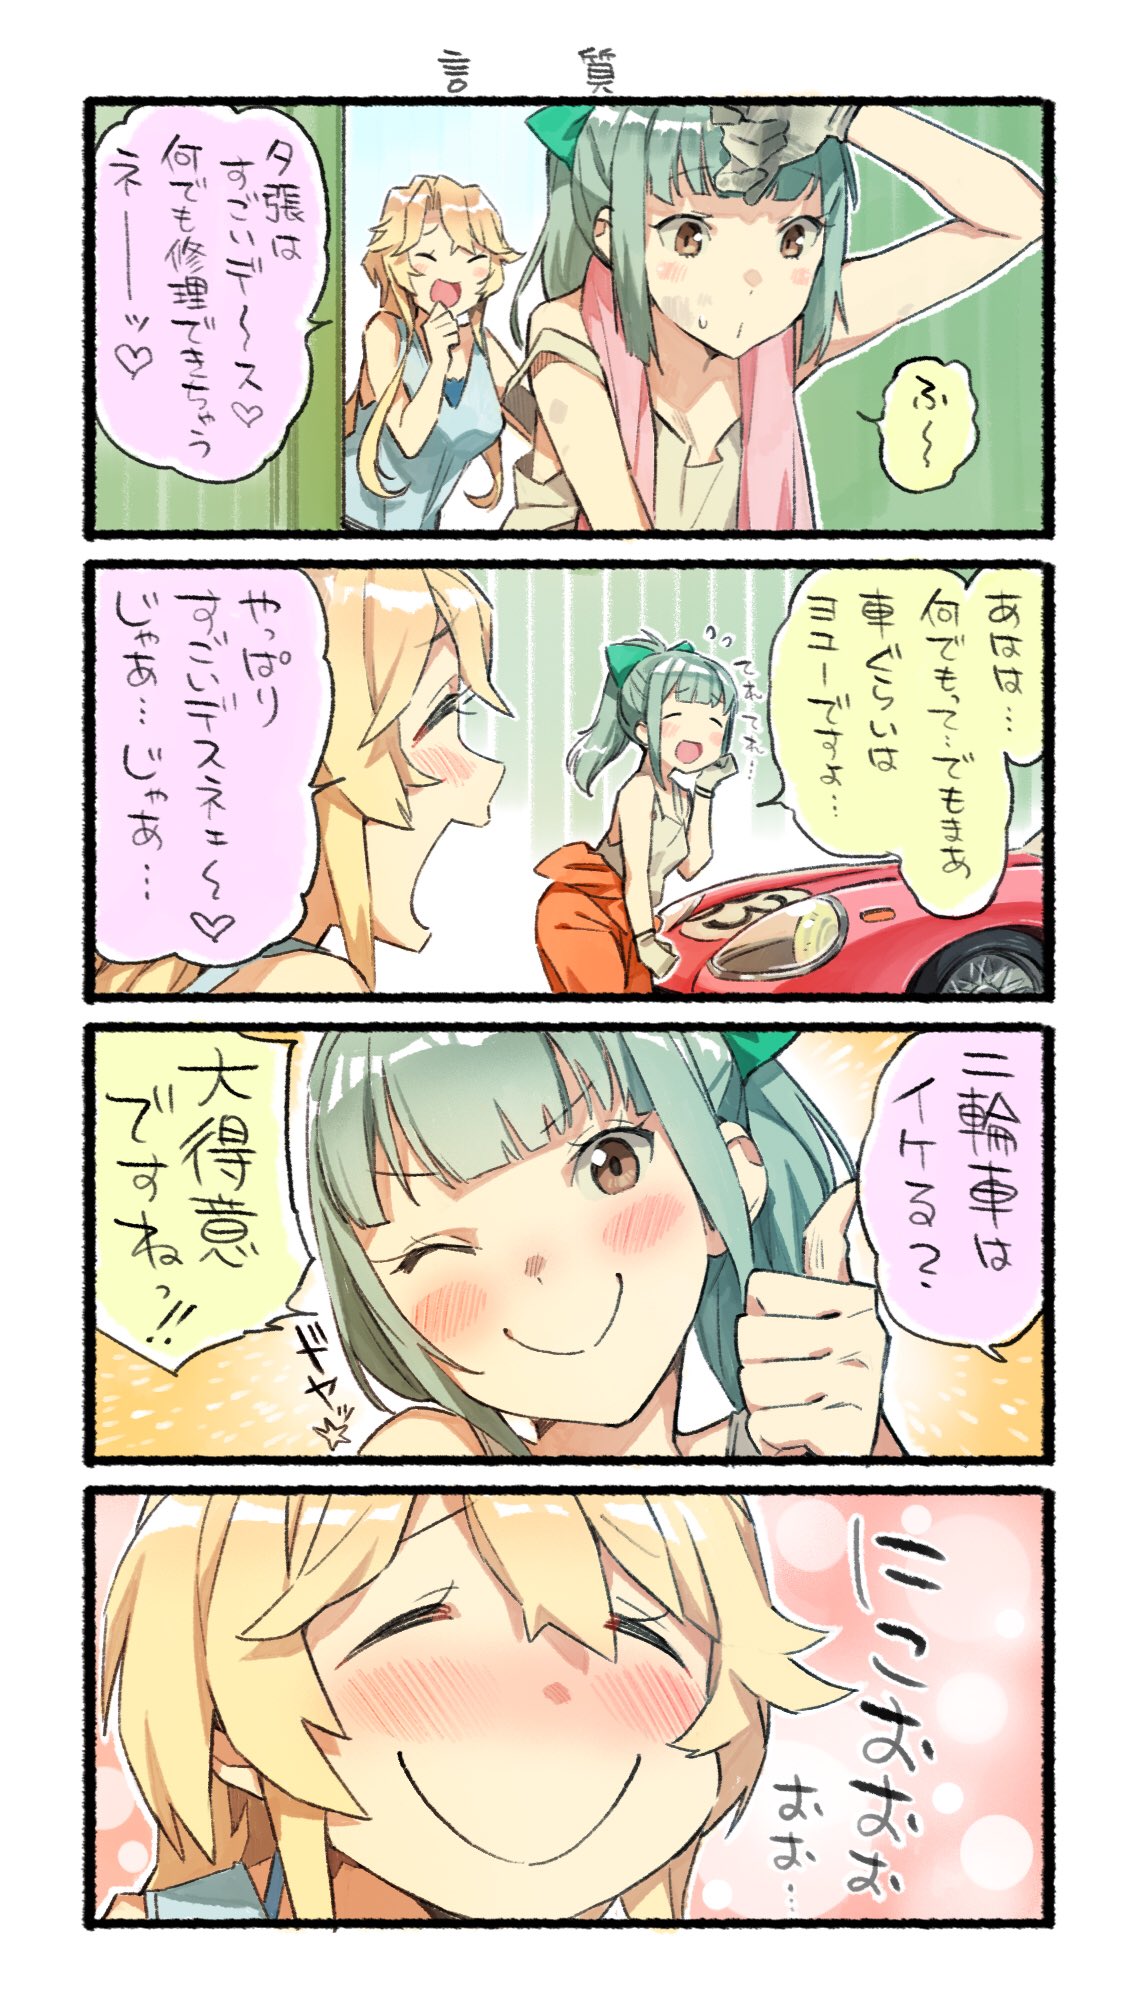 2girls alternate_costume blonde_hair blue_eyes bow breasts car casual closed_eyes commentary_request grey_hair ground_vehicle hair_bow highres iowa_(kantai_collection) jumpsuit kantai_collection large_breasts motor_vehicle multiple_girls nonco ponytail short_hair smile star thumbs_up tied_jumpsuit translation_request yuubari_(kantai_collection)